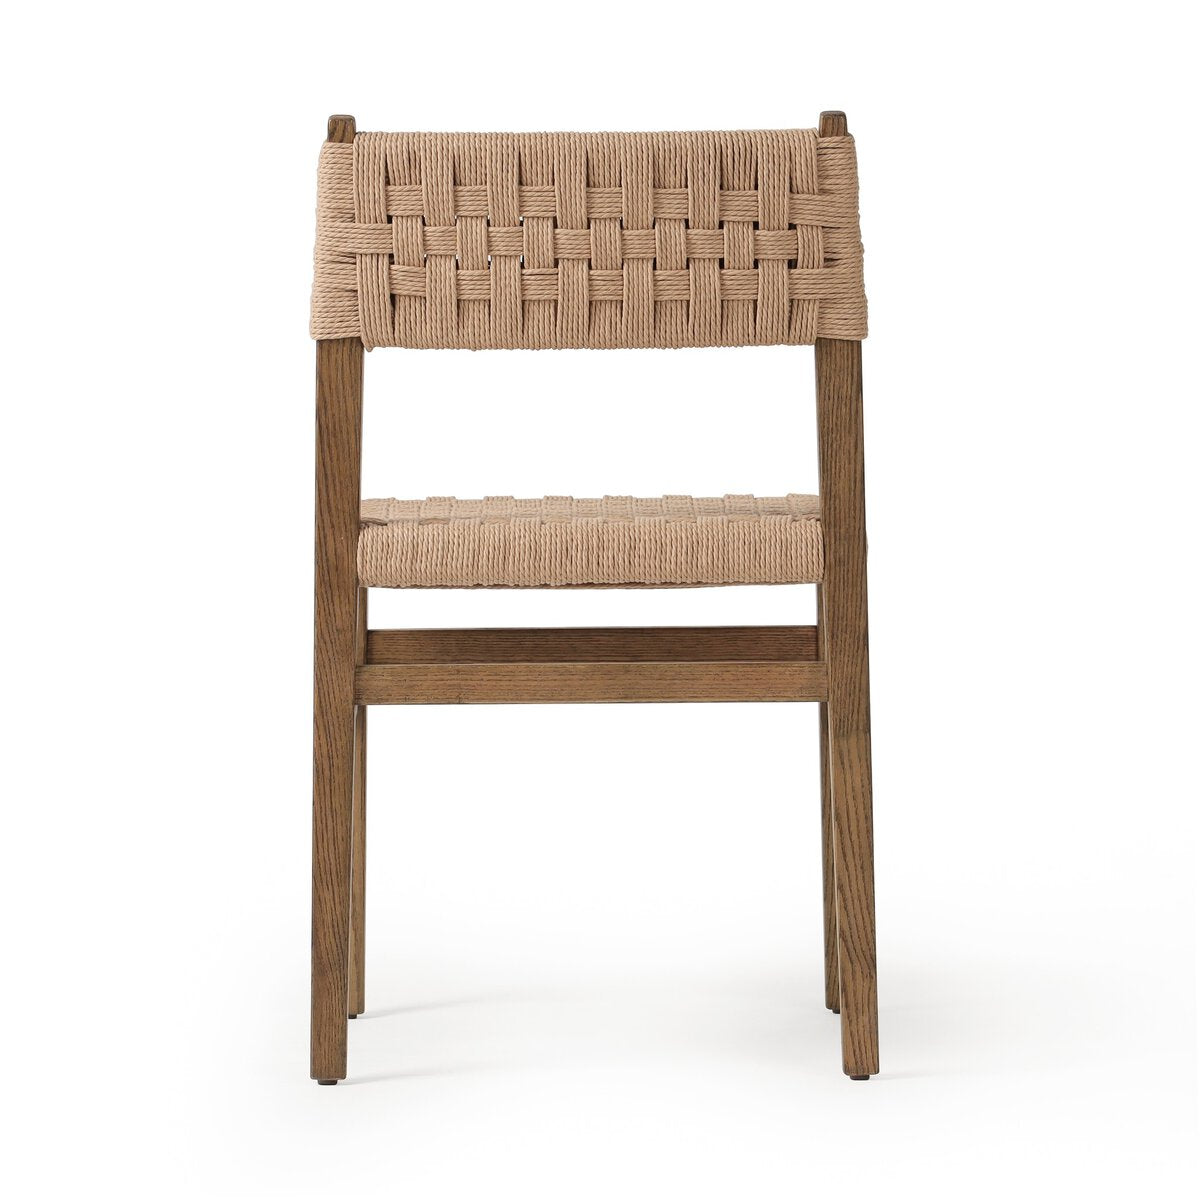 Boone Dining Chair